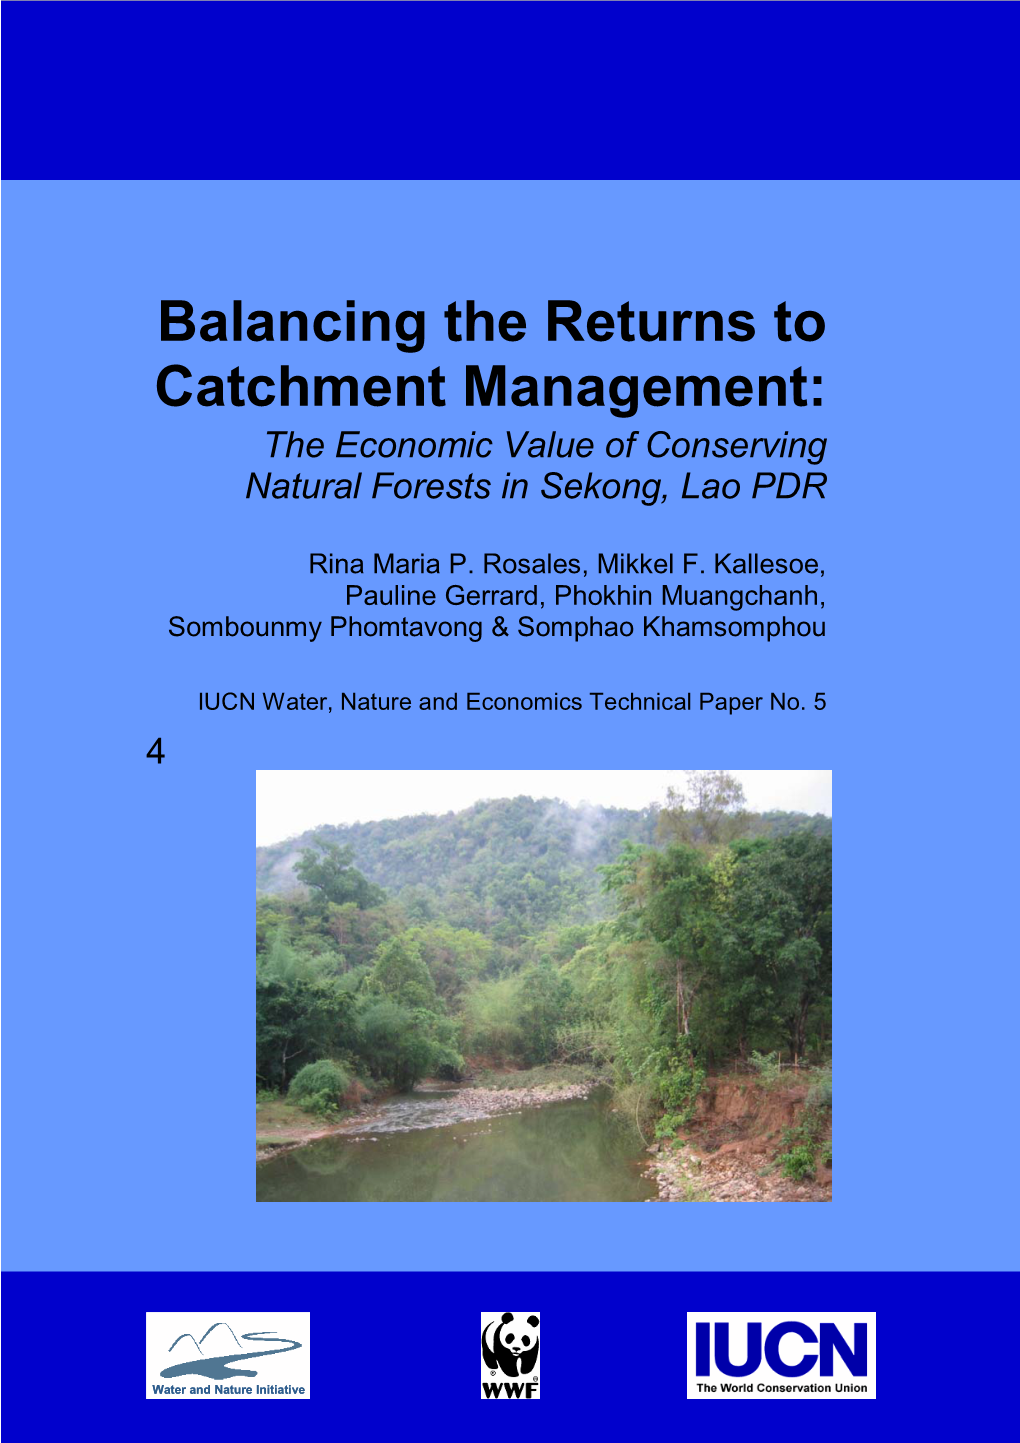 Balancing the Returns to Catchment Management: the Economic Value of Conserving Natural Forests in Sekong, Lao PDR